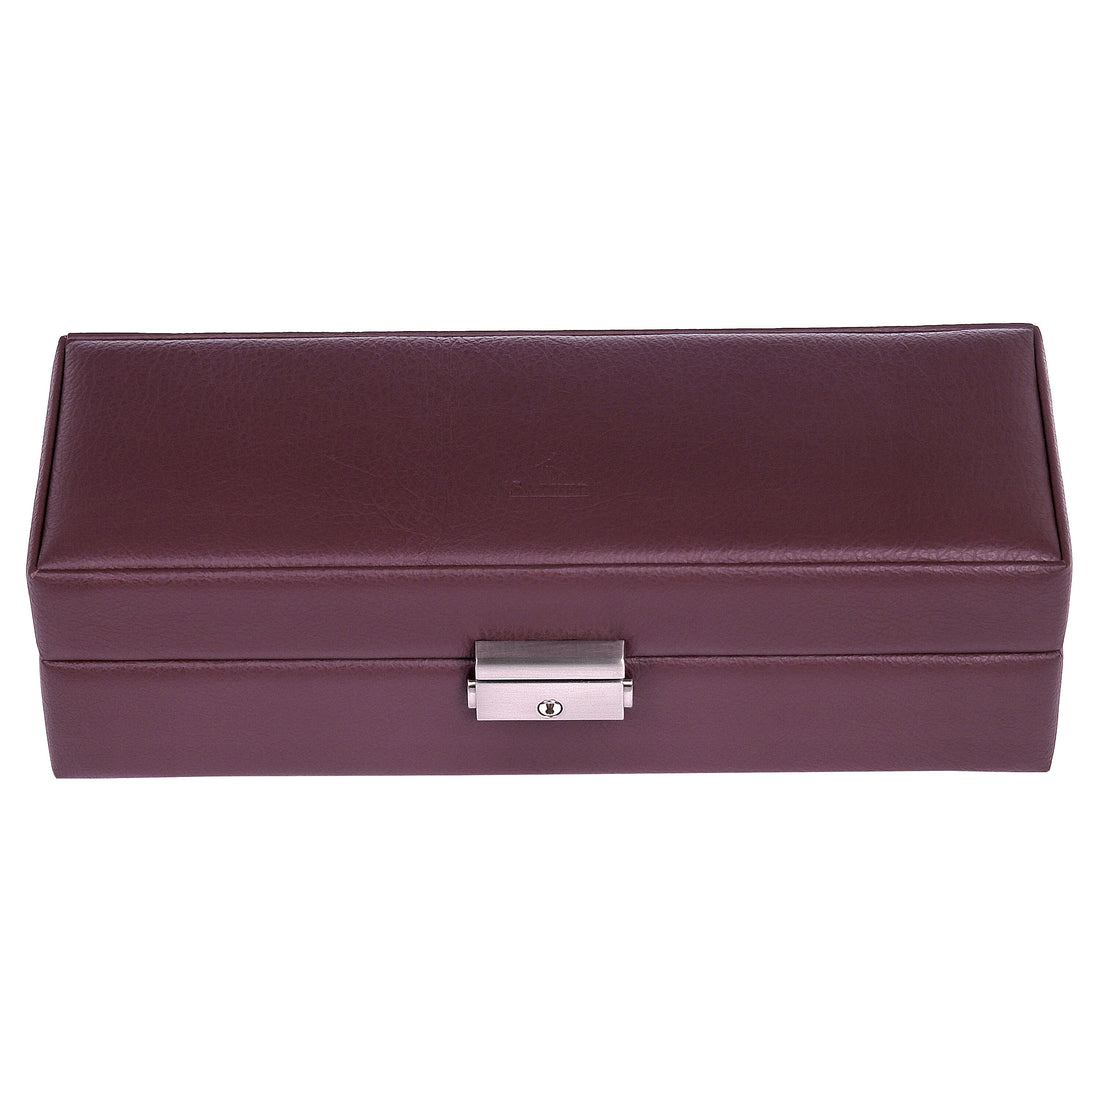 case for 5 watches cadeluxe / bordeaux (cowhide leather)